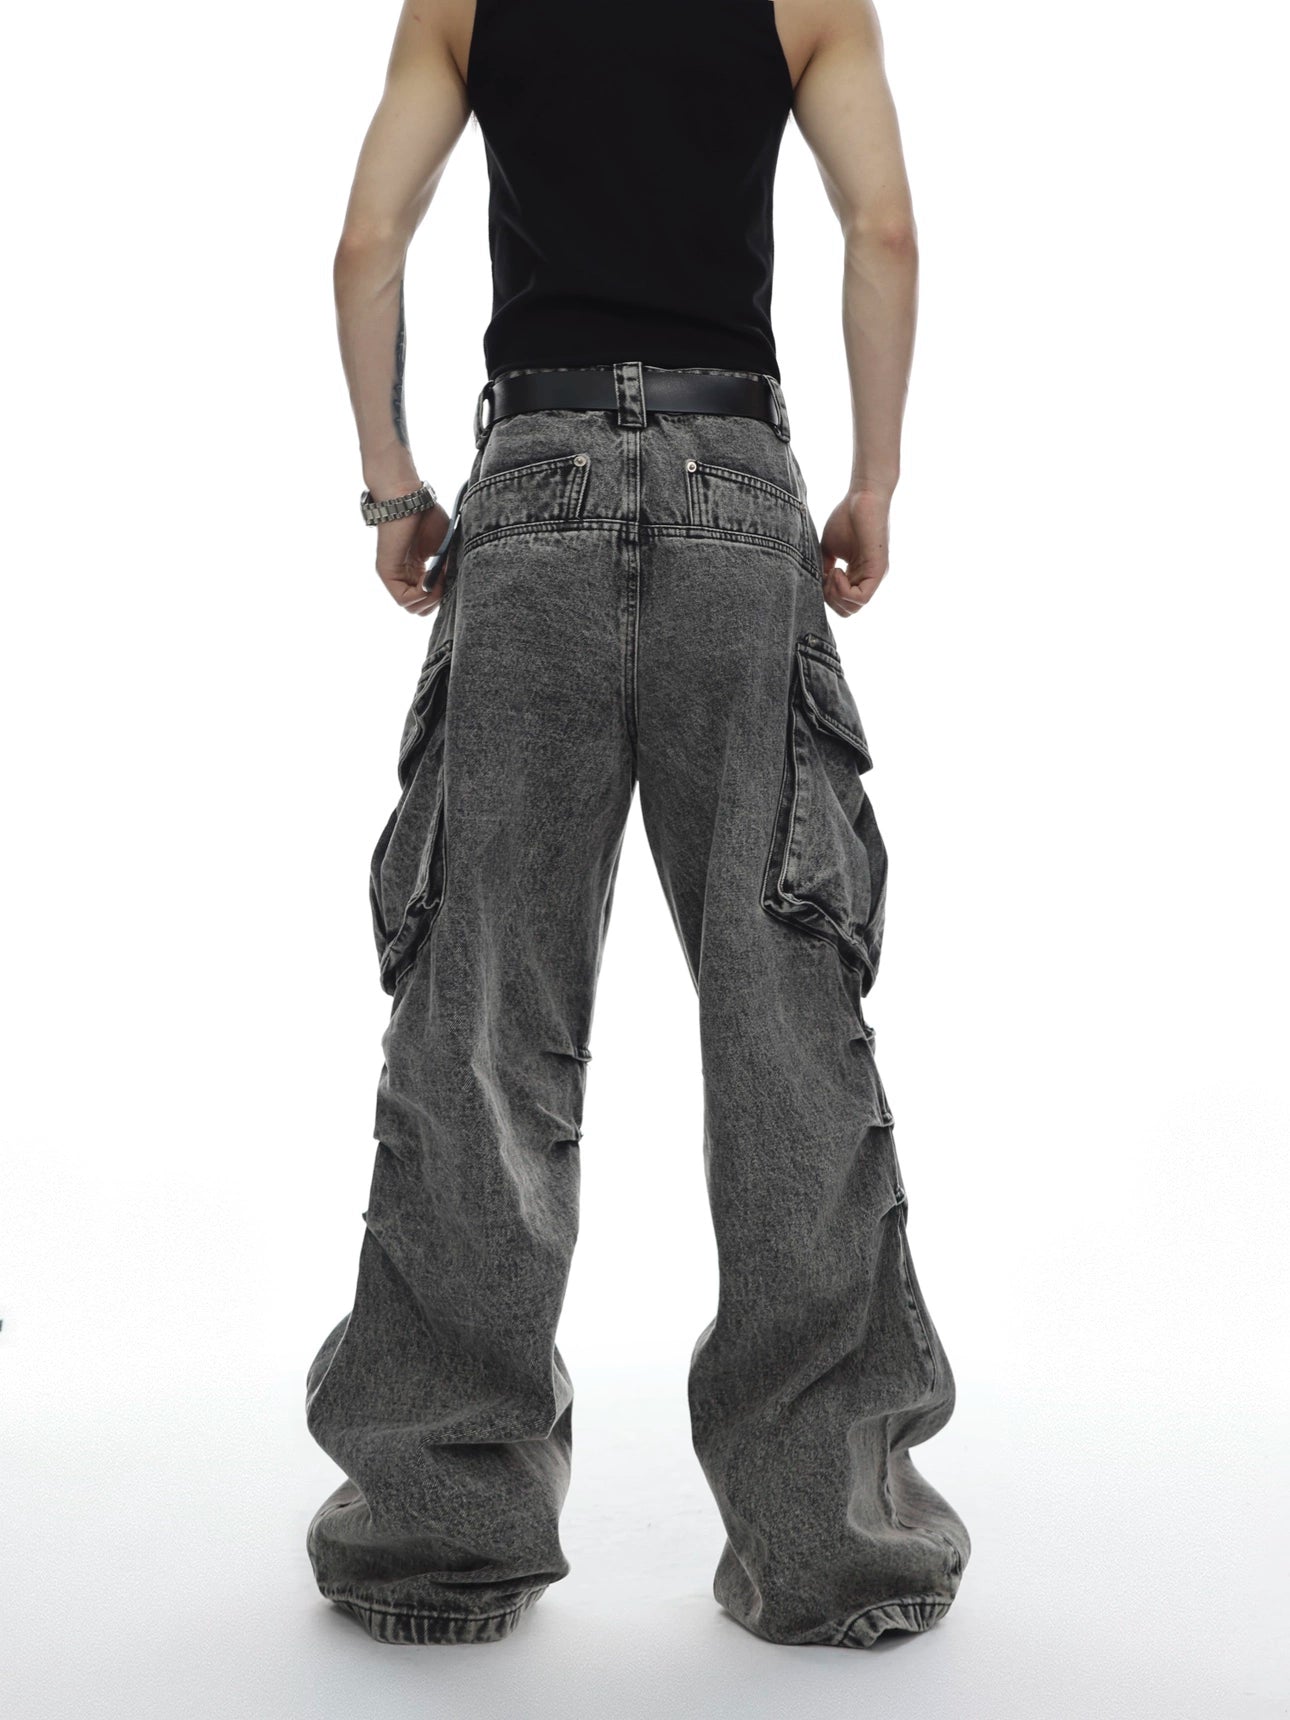 CulturE Minority Heavy Industry Wrinkle Washed Micro Horn Jeans Large Pocket Design Casual Wide Leg Pants Men